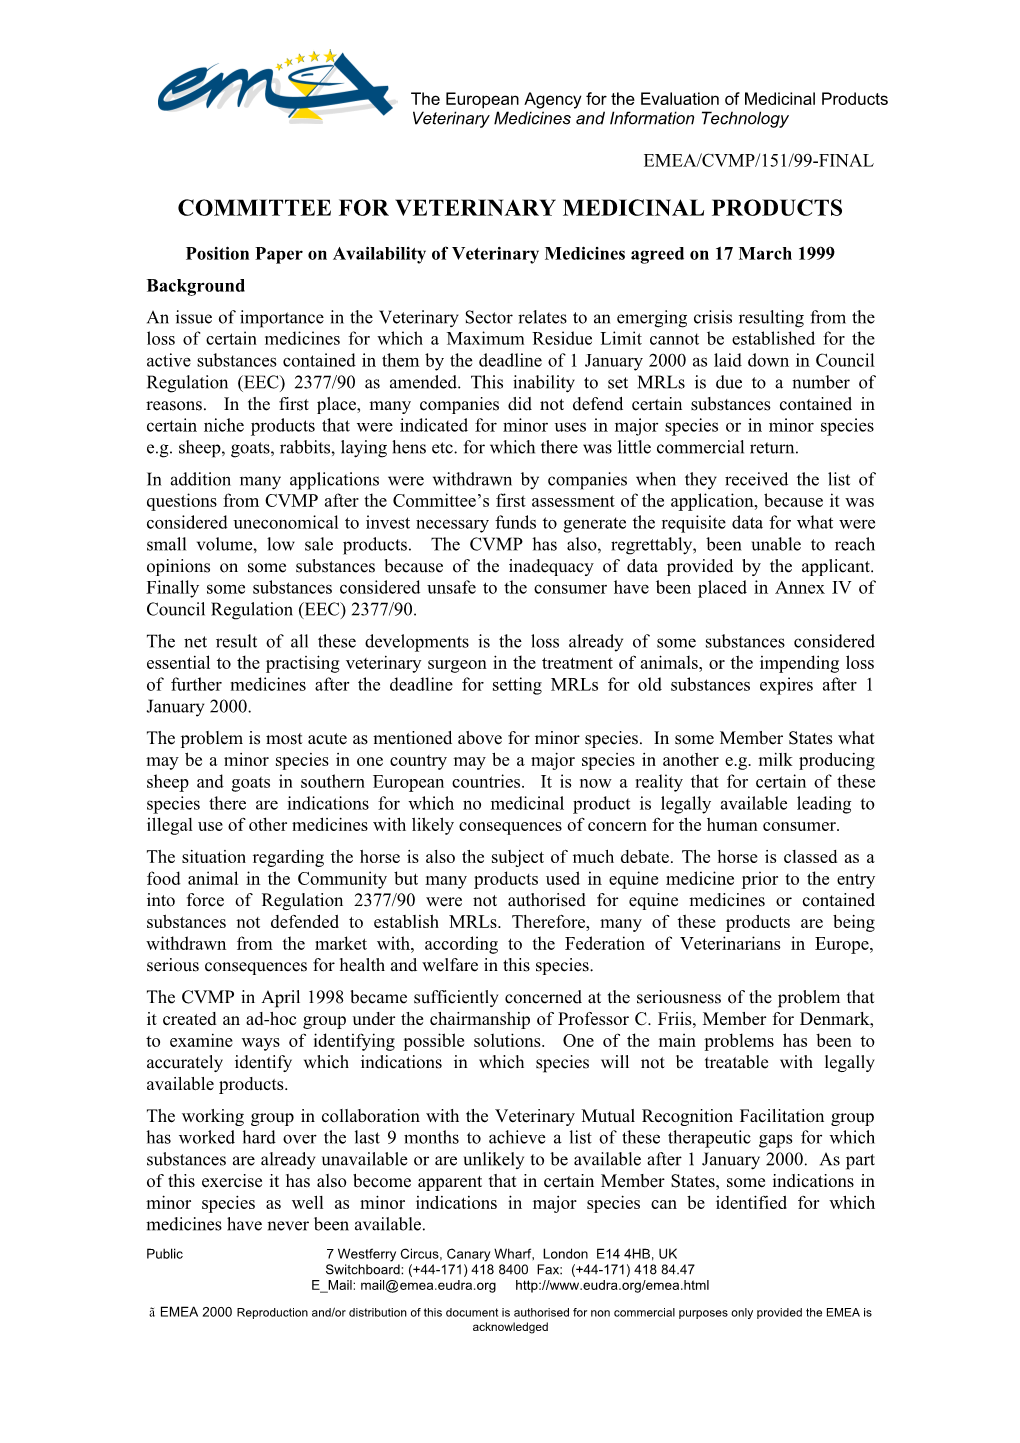 Position Paper on Availability of Veterinary Medicines Agreed on 17 March 1999